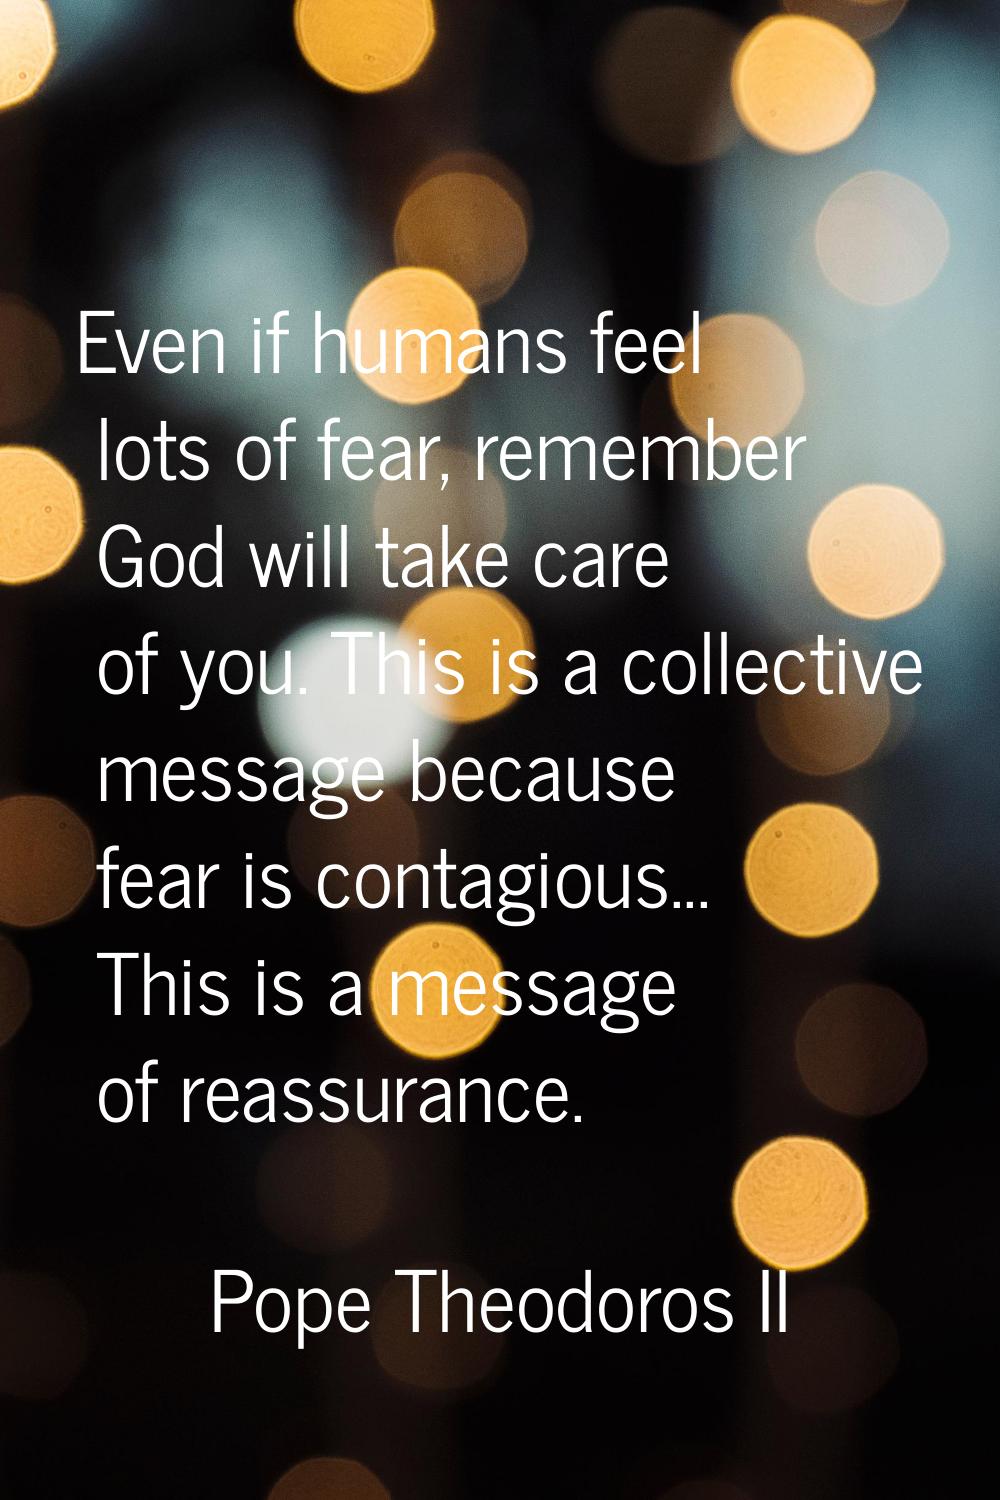 Even if humans feel lots of fear, remember God will take care of you. This is a collective message 